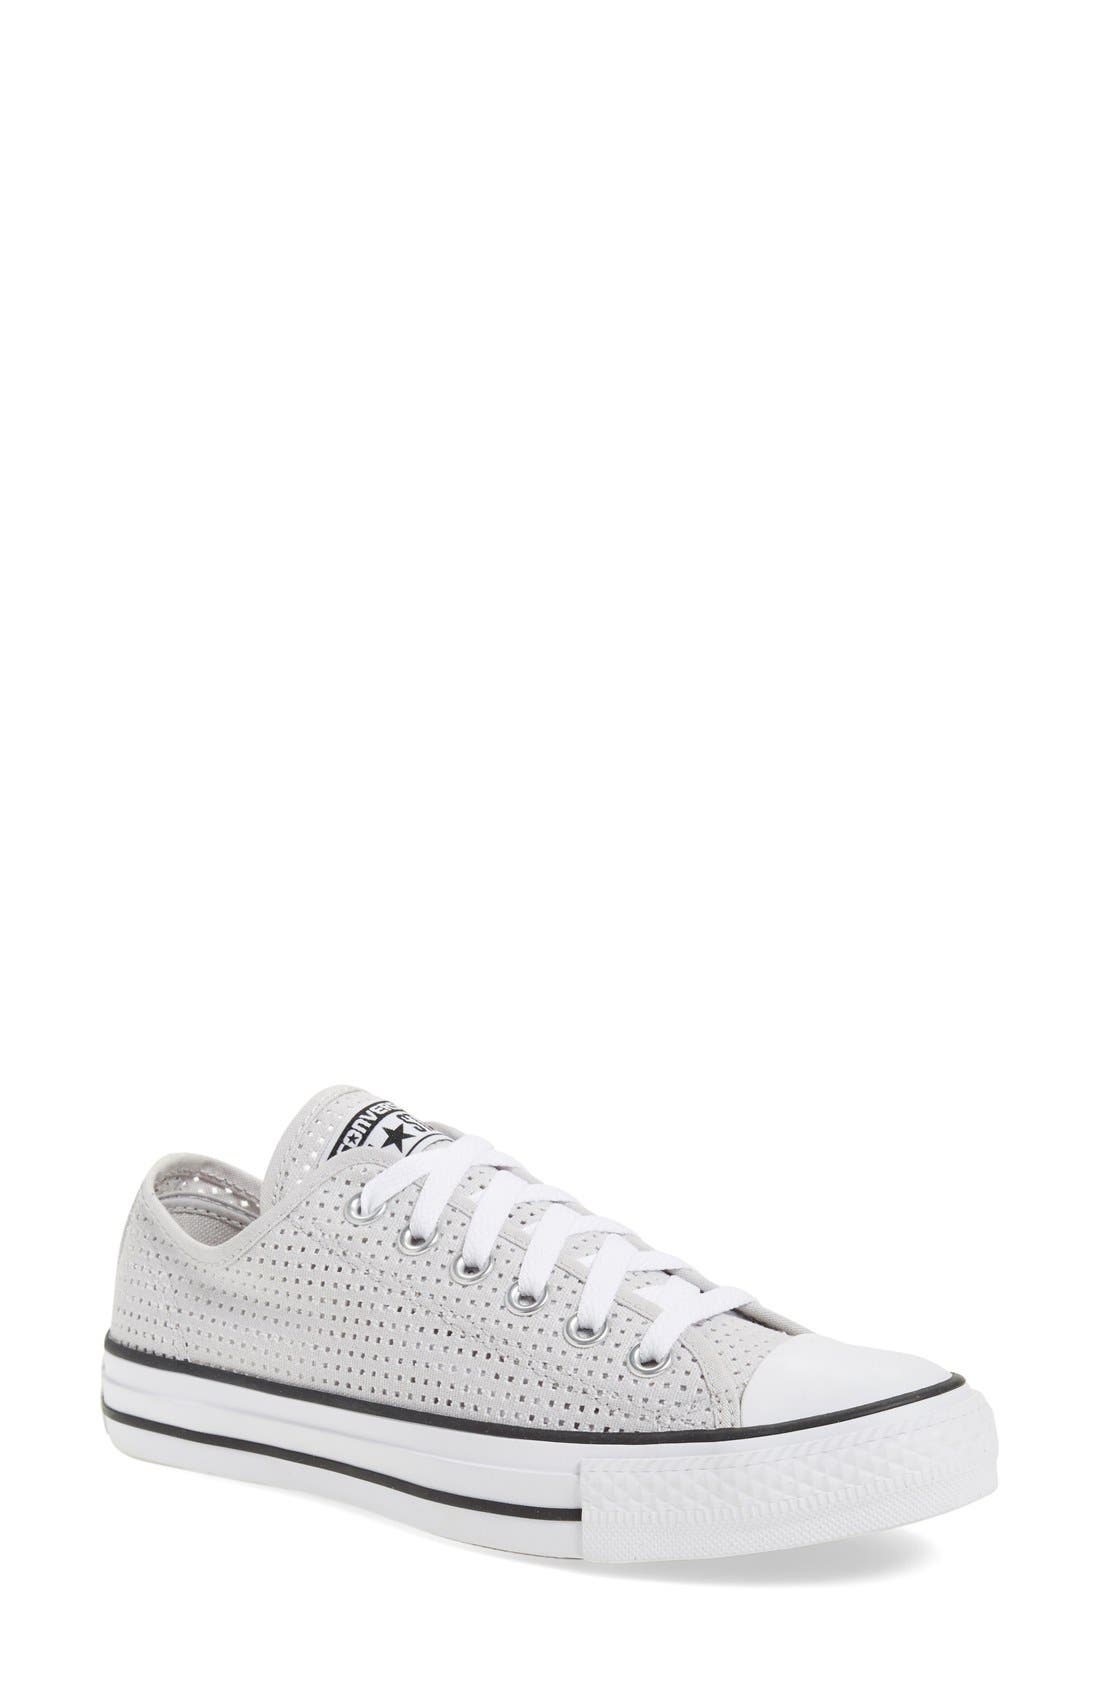 converse all star perfed canvas